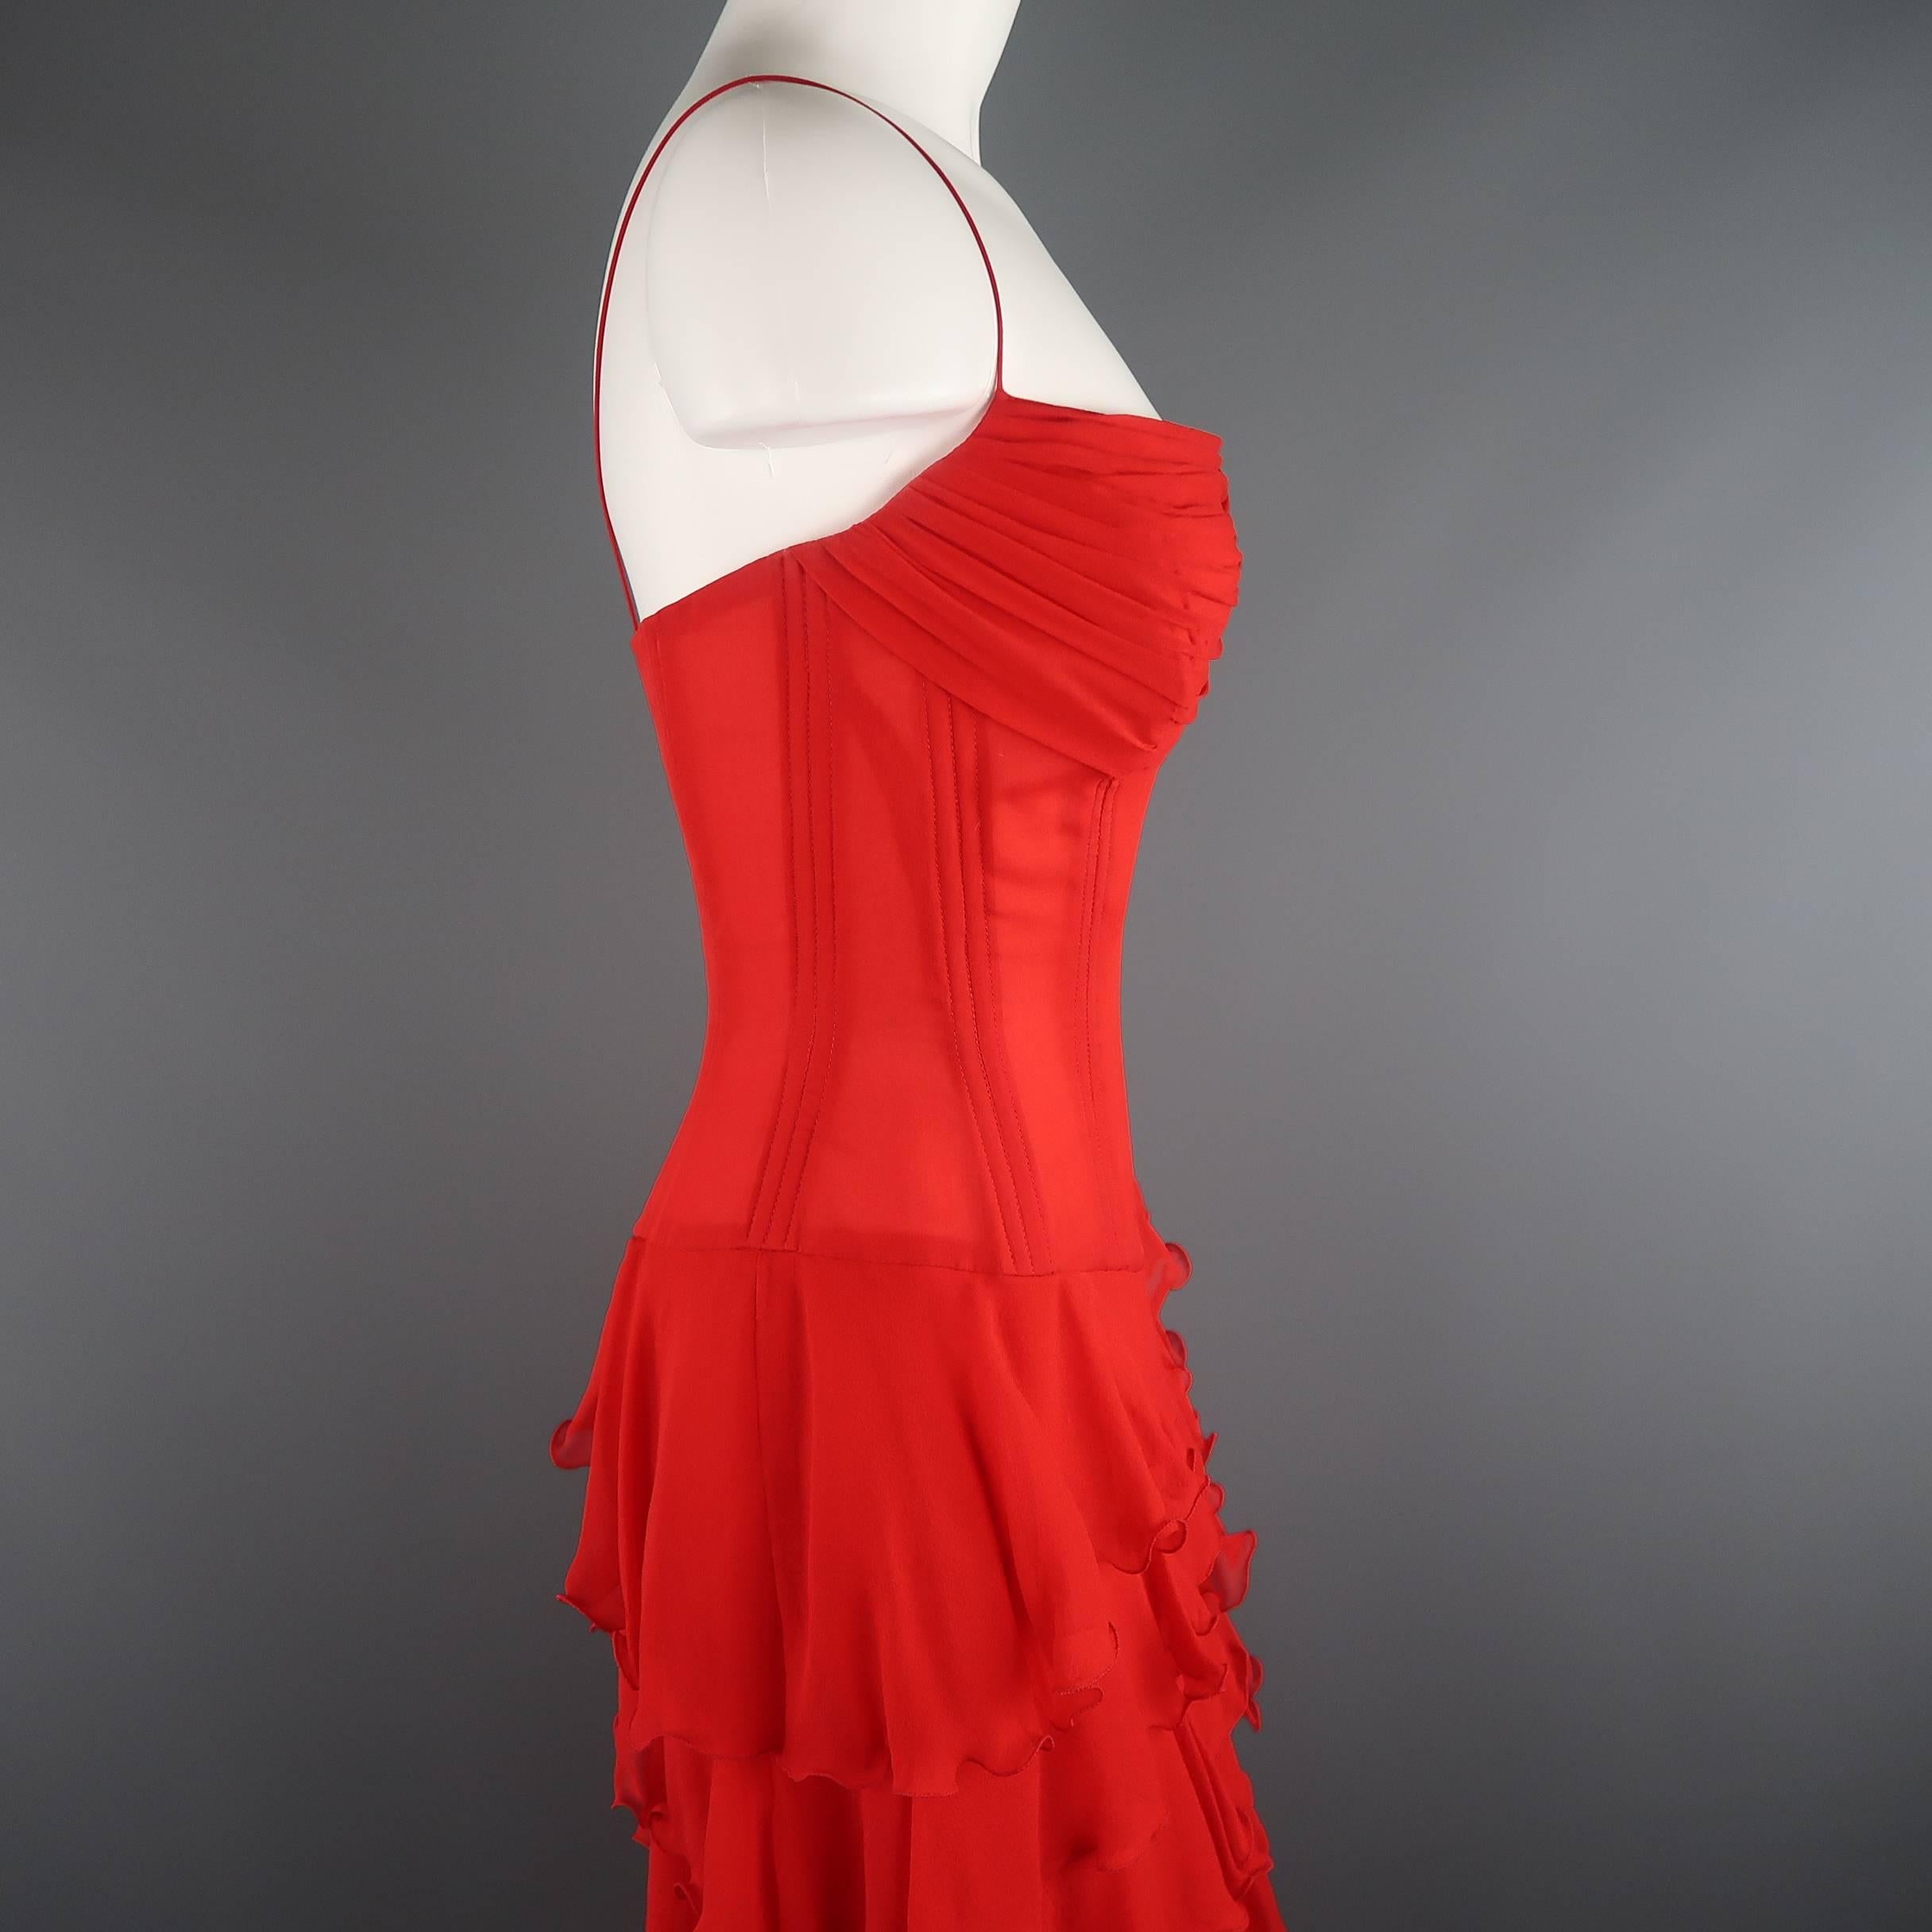 Vicky Tiel Couture Dress - Red Silk Chiffon Asymmetrical Ruffle Corset Cocktail 1